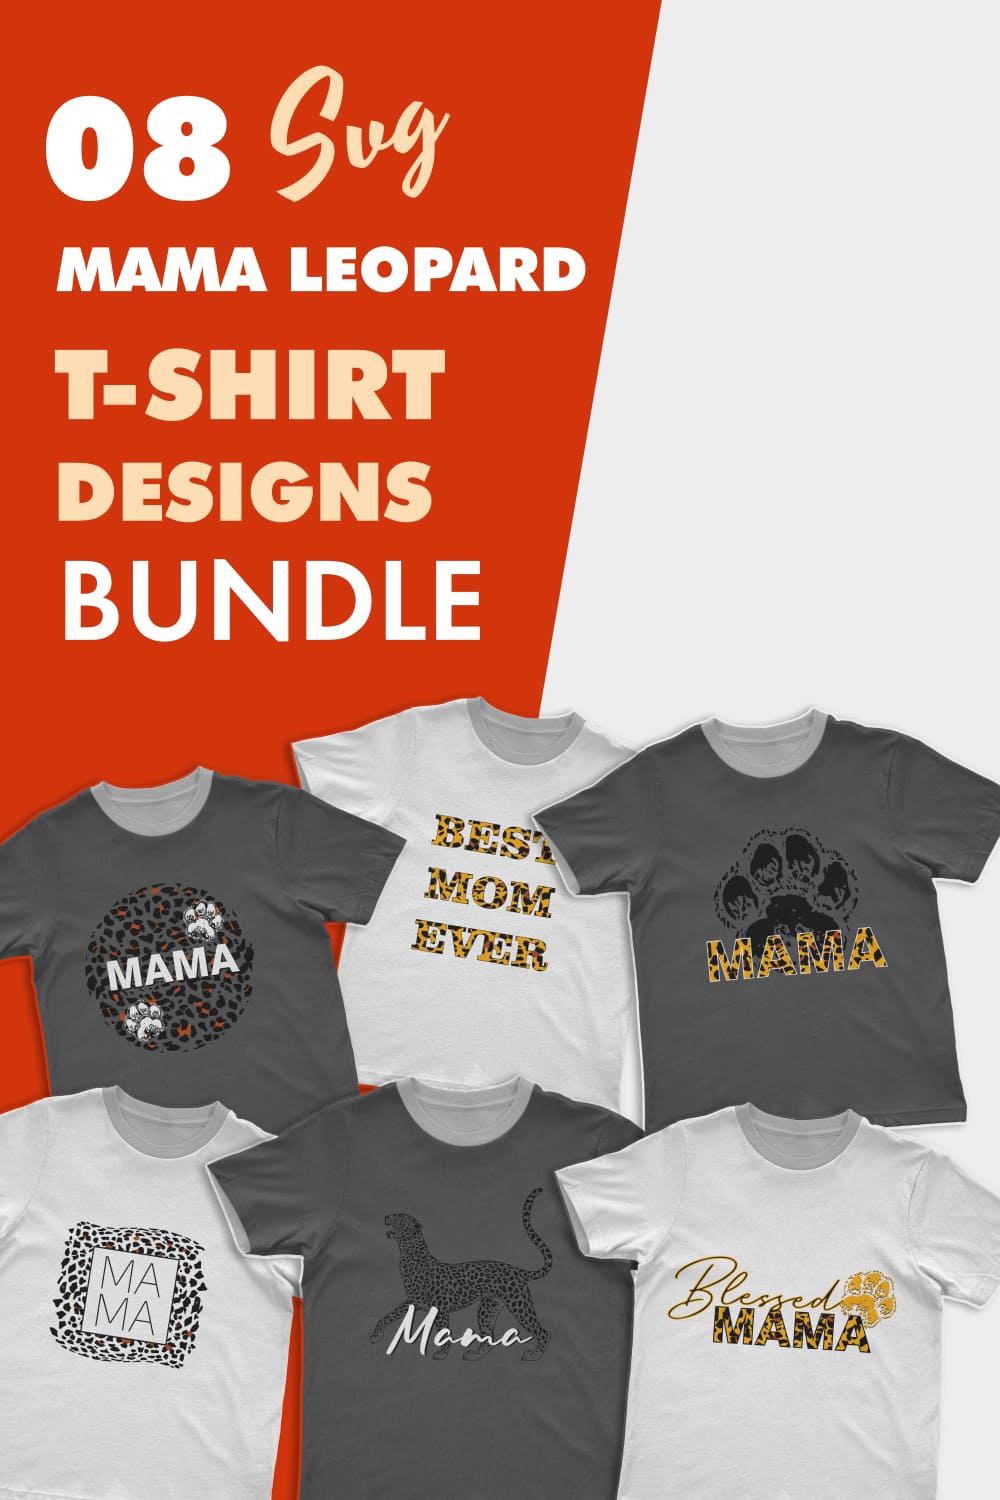 Mama leopard SVG, picture for pinterest 1000x1500.